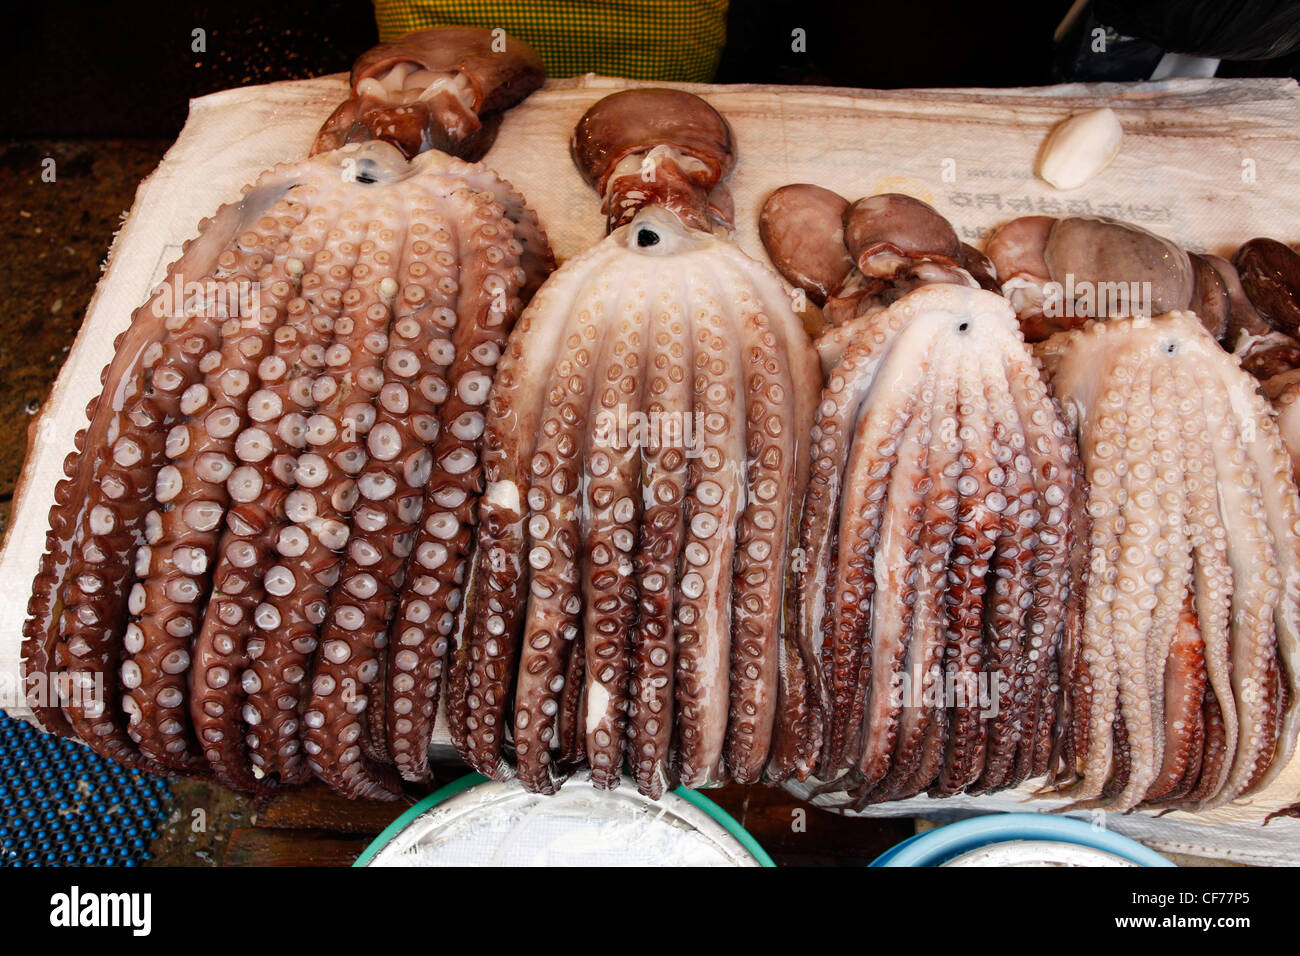 Octopus with tentacles and suckers in a seafood display in Jagalchi Fish Market in Busan, South Korea Stock Photo